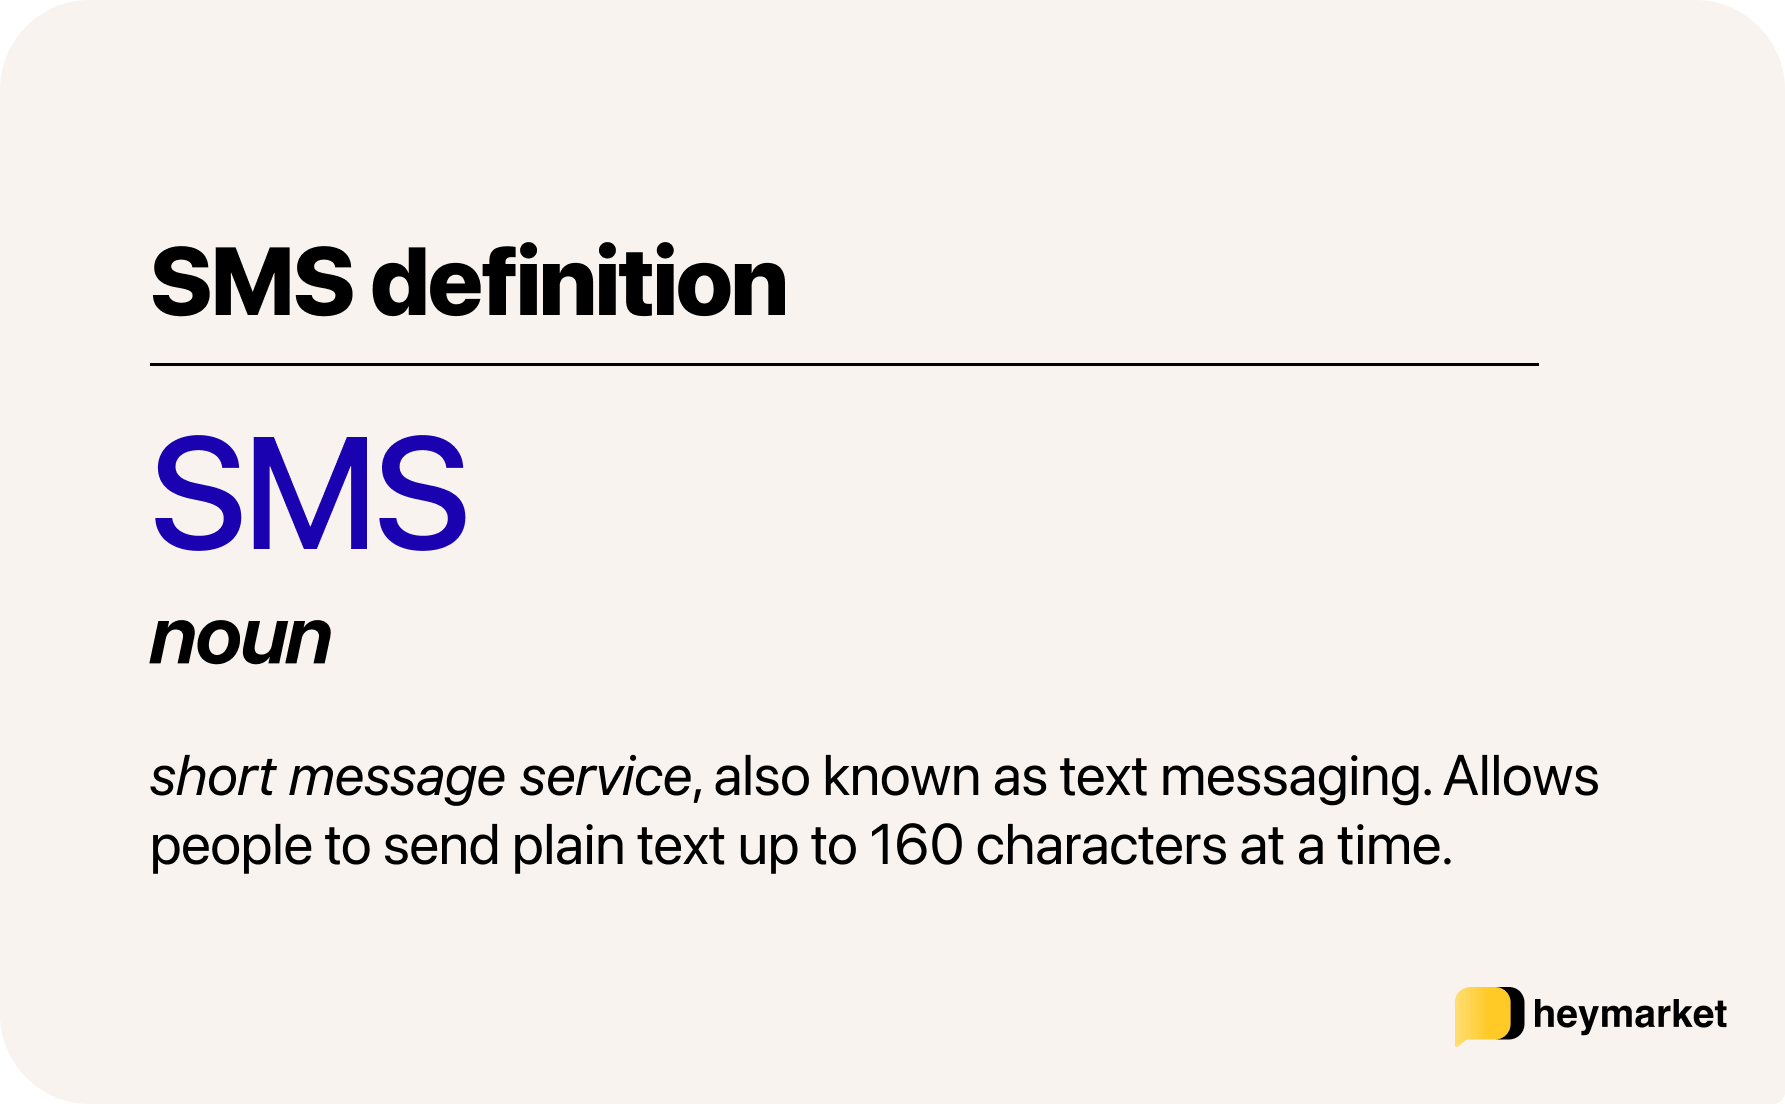 SMS definition: Short message service, also known as text messaging. Allows people to send plain text up to 160 characters at a time.